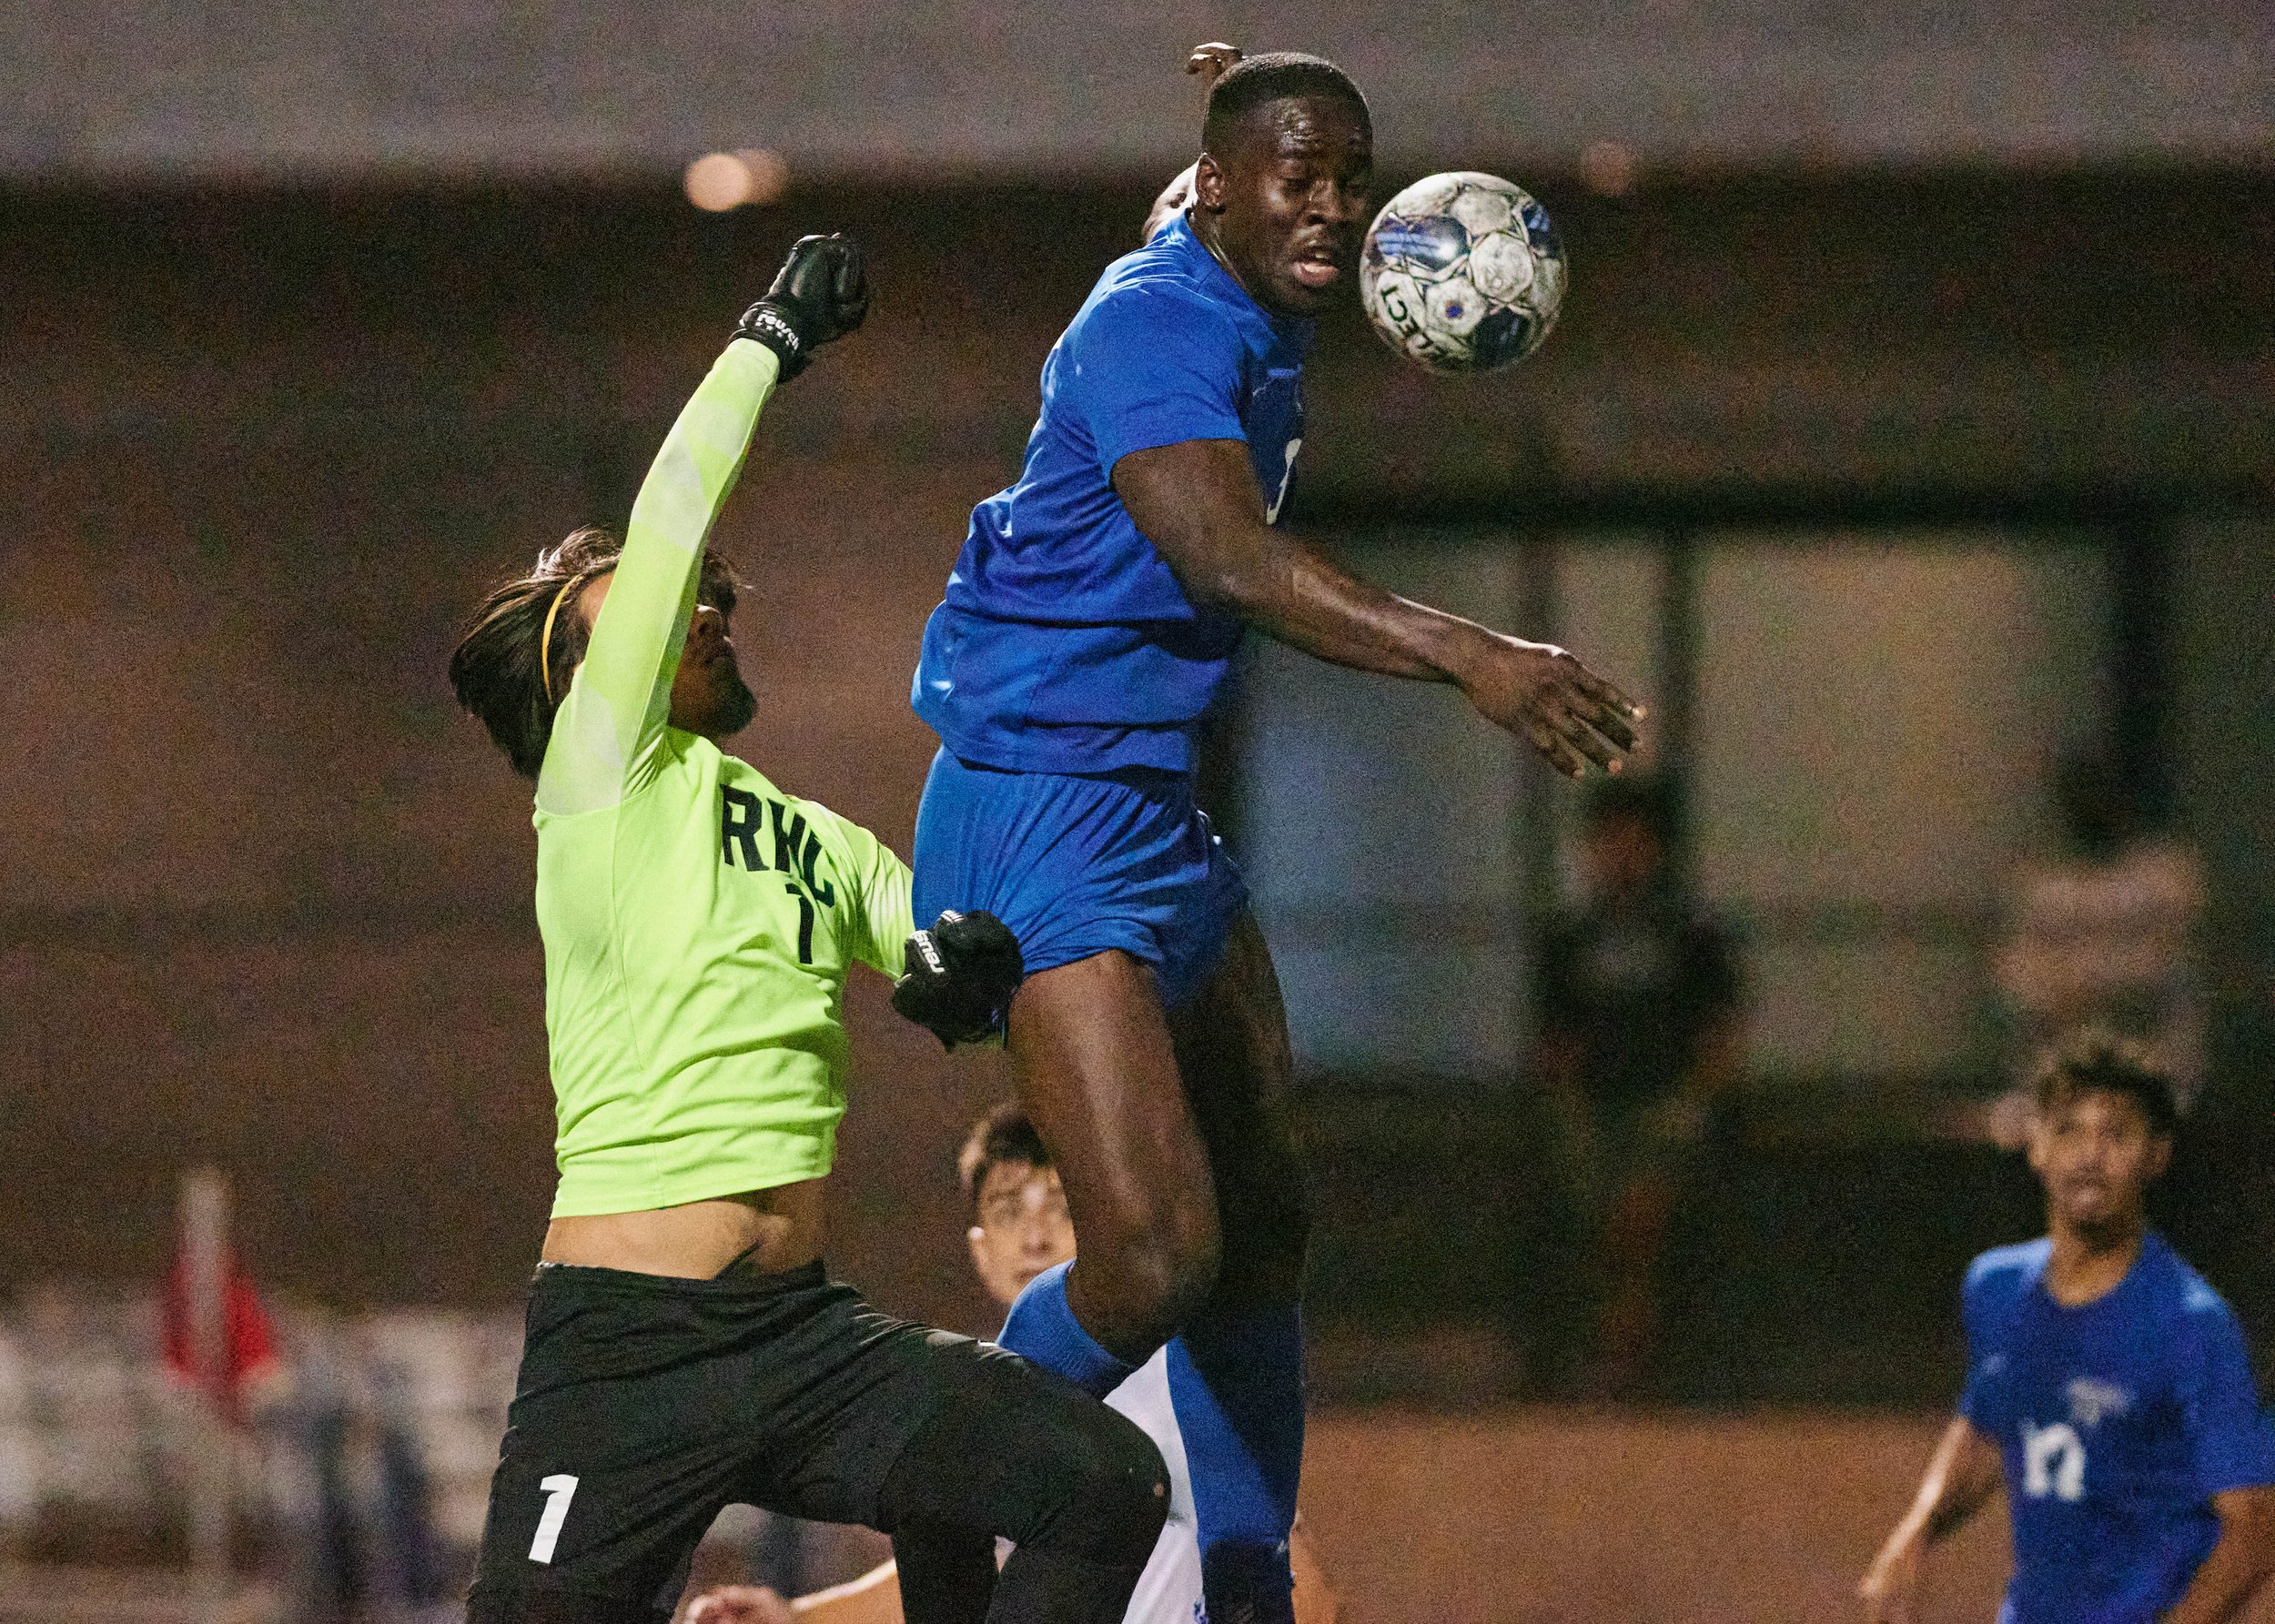  Santa Monica College Corsairs' Philip Hephzibah (right) heads the ball in front of Rio Hondo College Roadrunners goalie Bryan Cote (left) during the men's soccer match on Saturday, Nov. 18, 2023, at Corsair Field in Santa Monica, Calif. The Corsairs